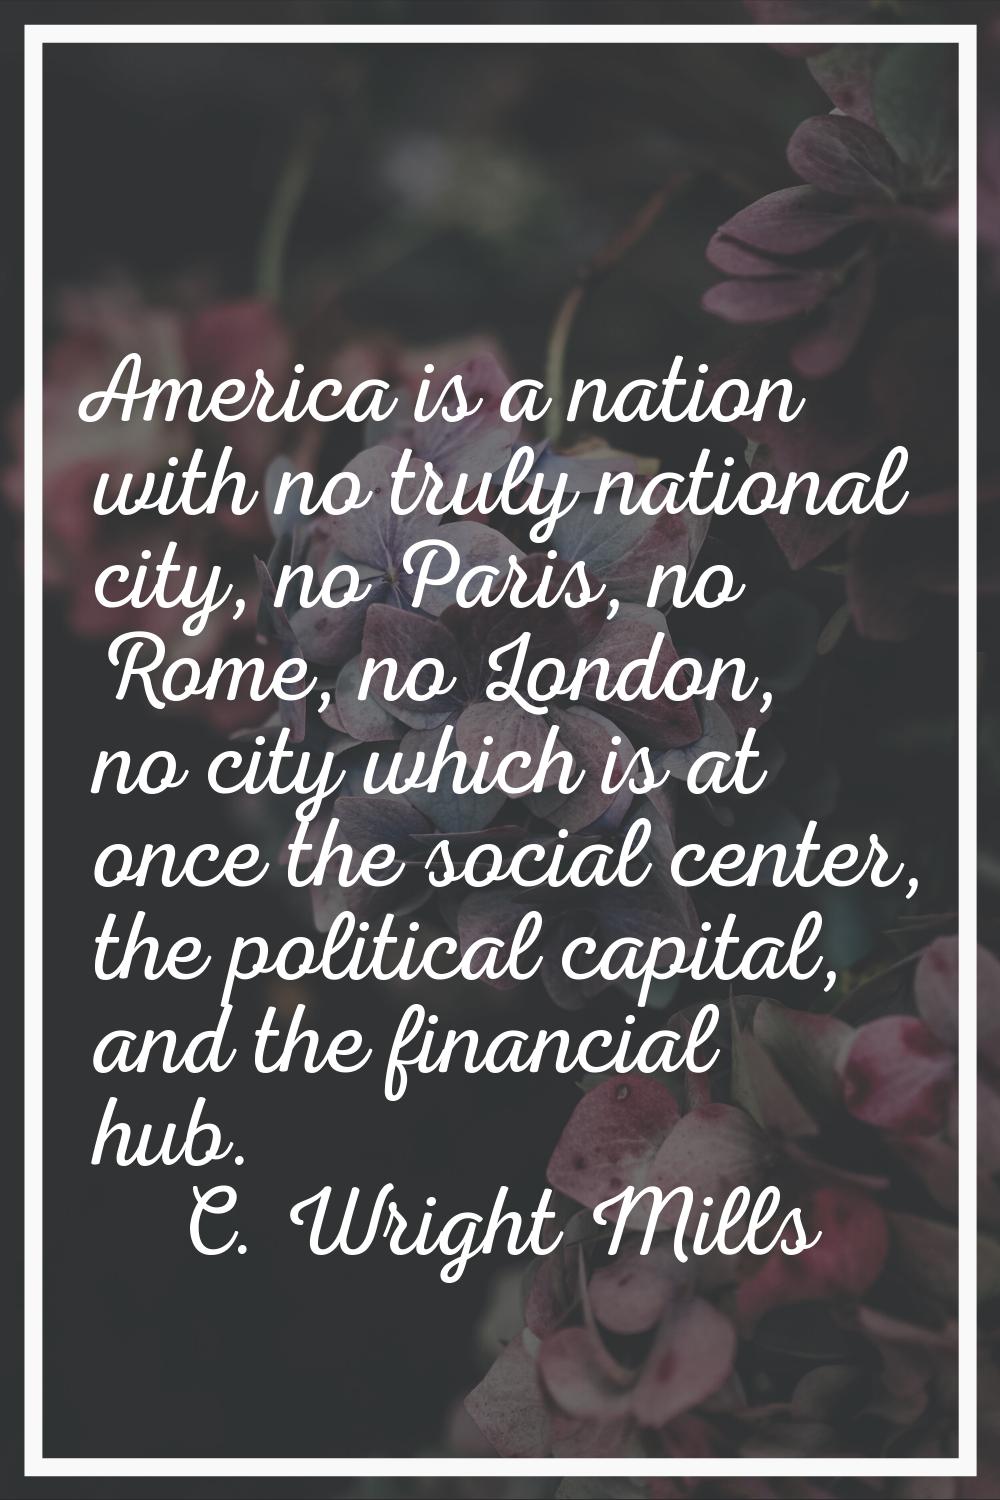 America is a nation with no truly national city, no Paris, no Rome, no London, no city which is at 